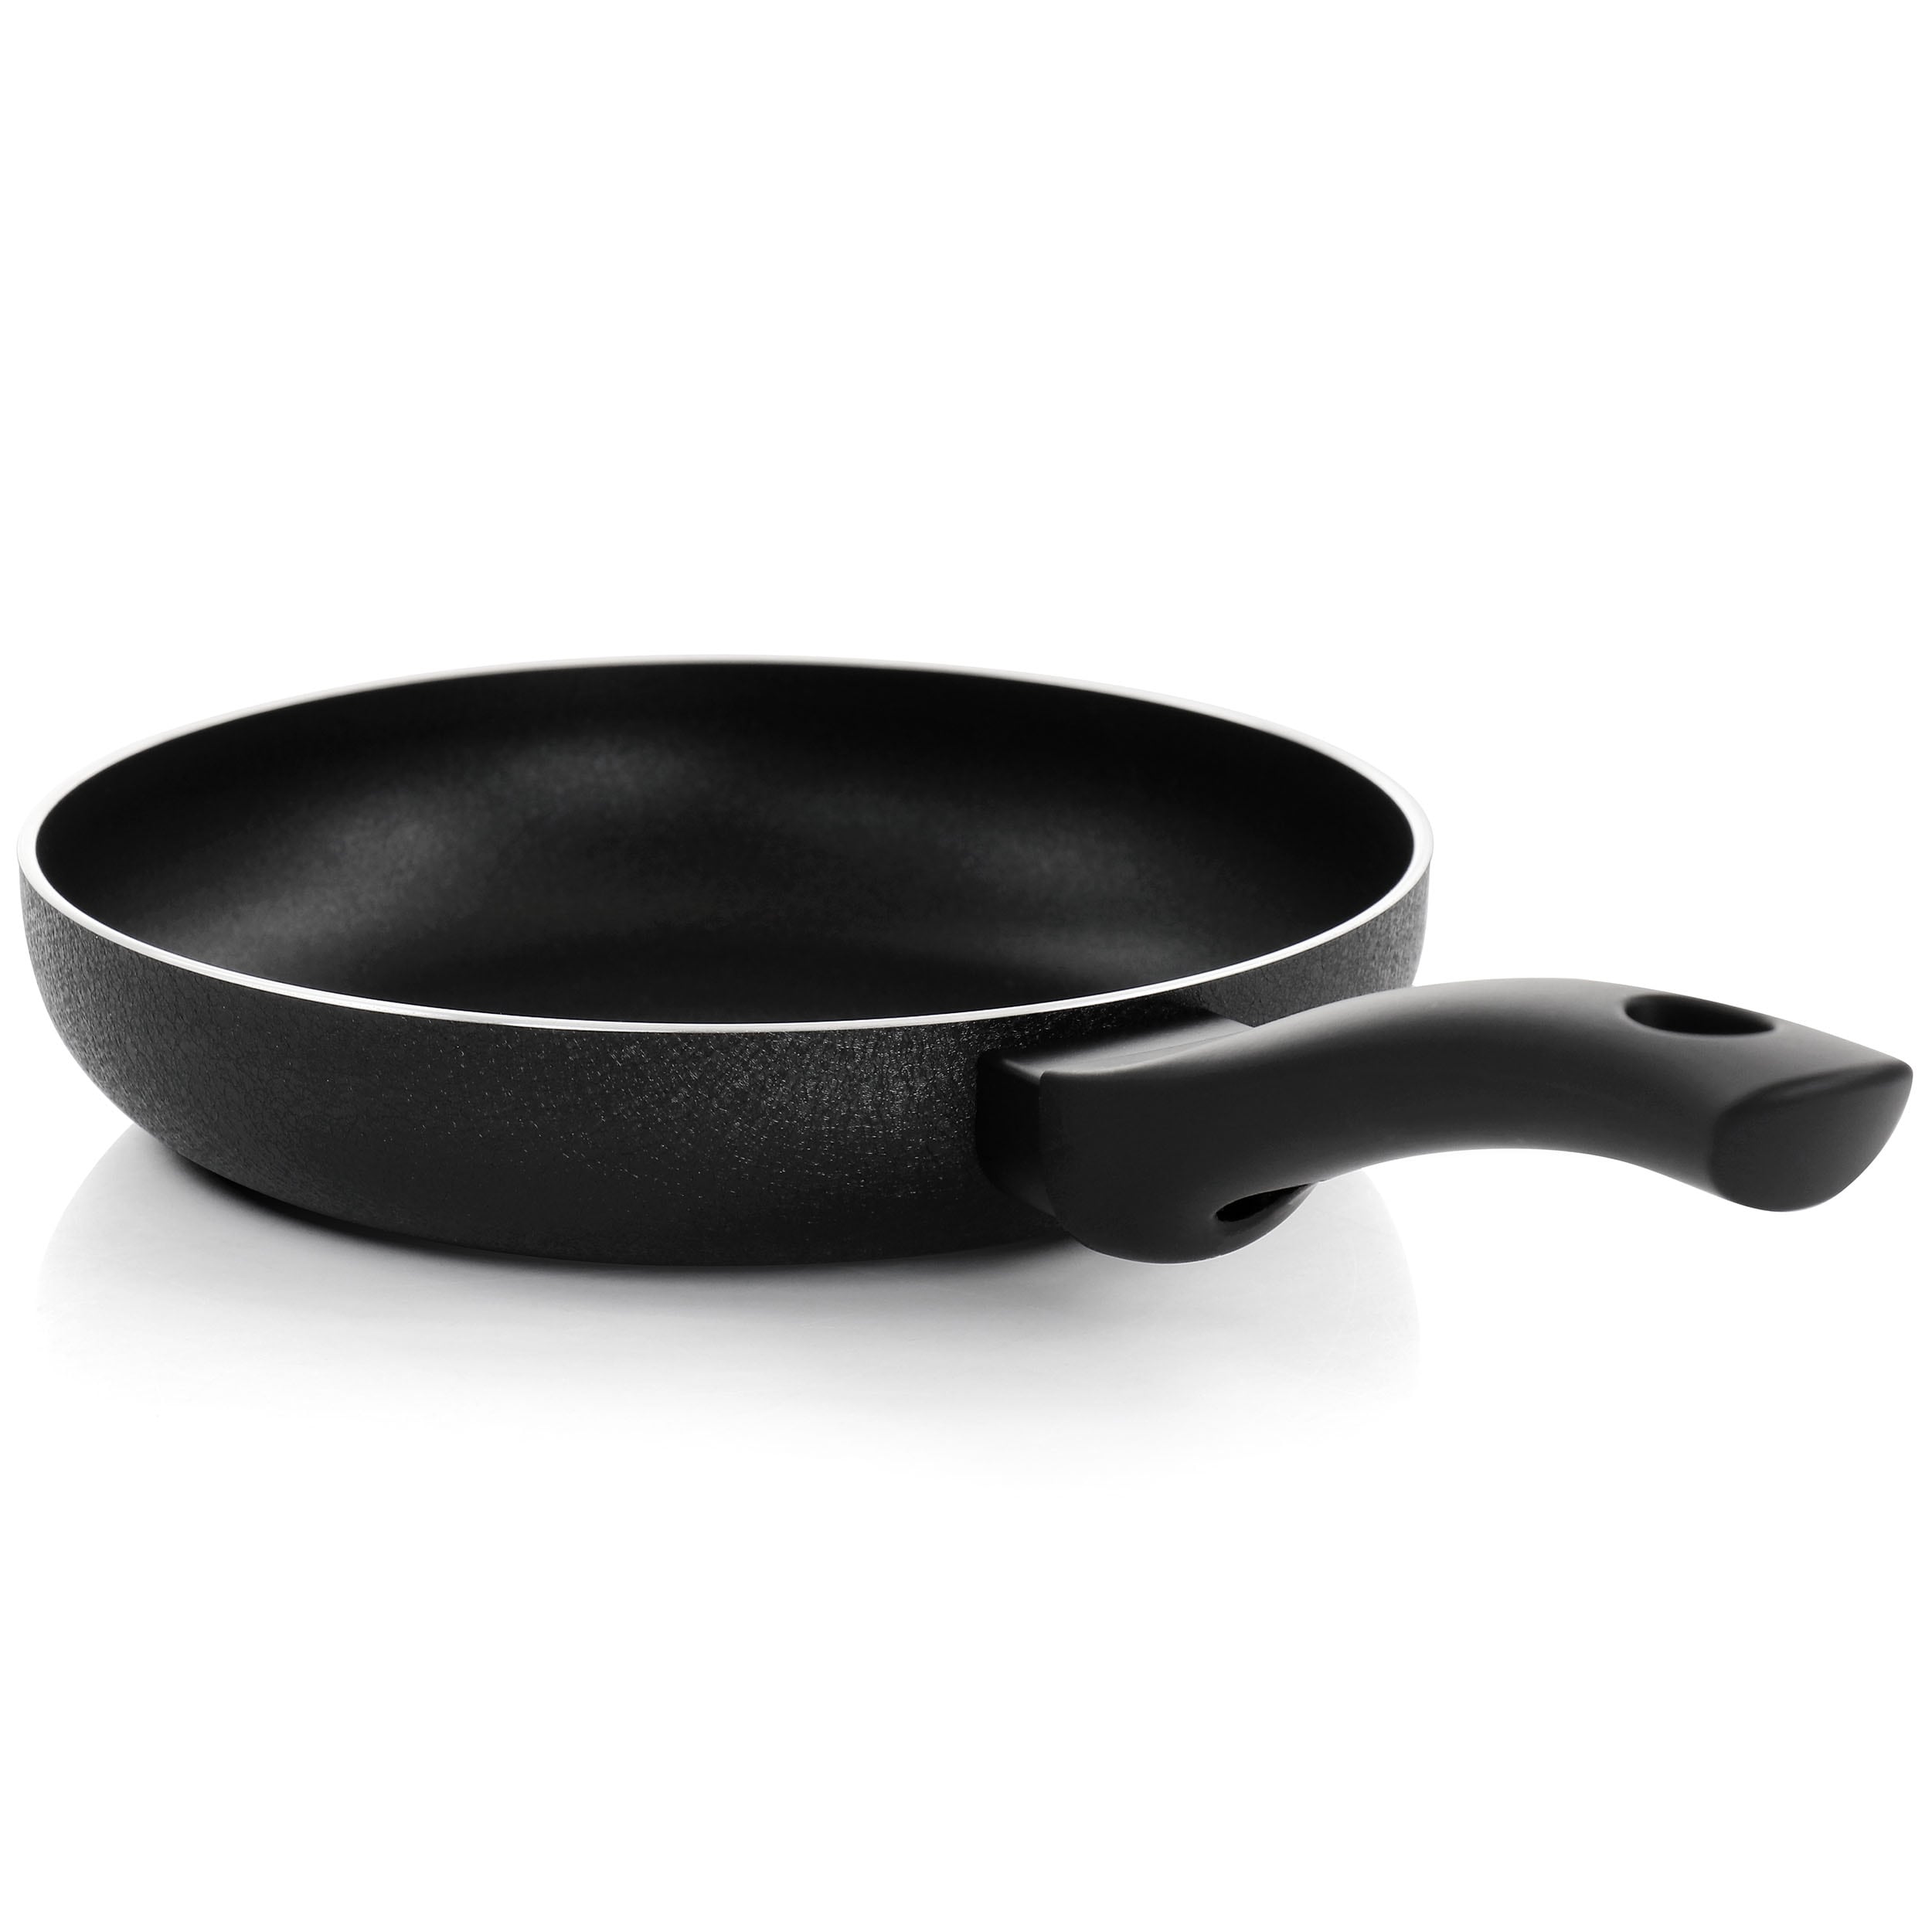 https://ak1.ostkcdn.com/images/products/is/images/direct/74582b01569a55e6e48f8cac1a806150ef99fae2/Oster-Ashford-8-Inch-Non-Stick-Aluminum-Frying-Pan-in-Black.jpg